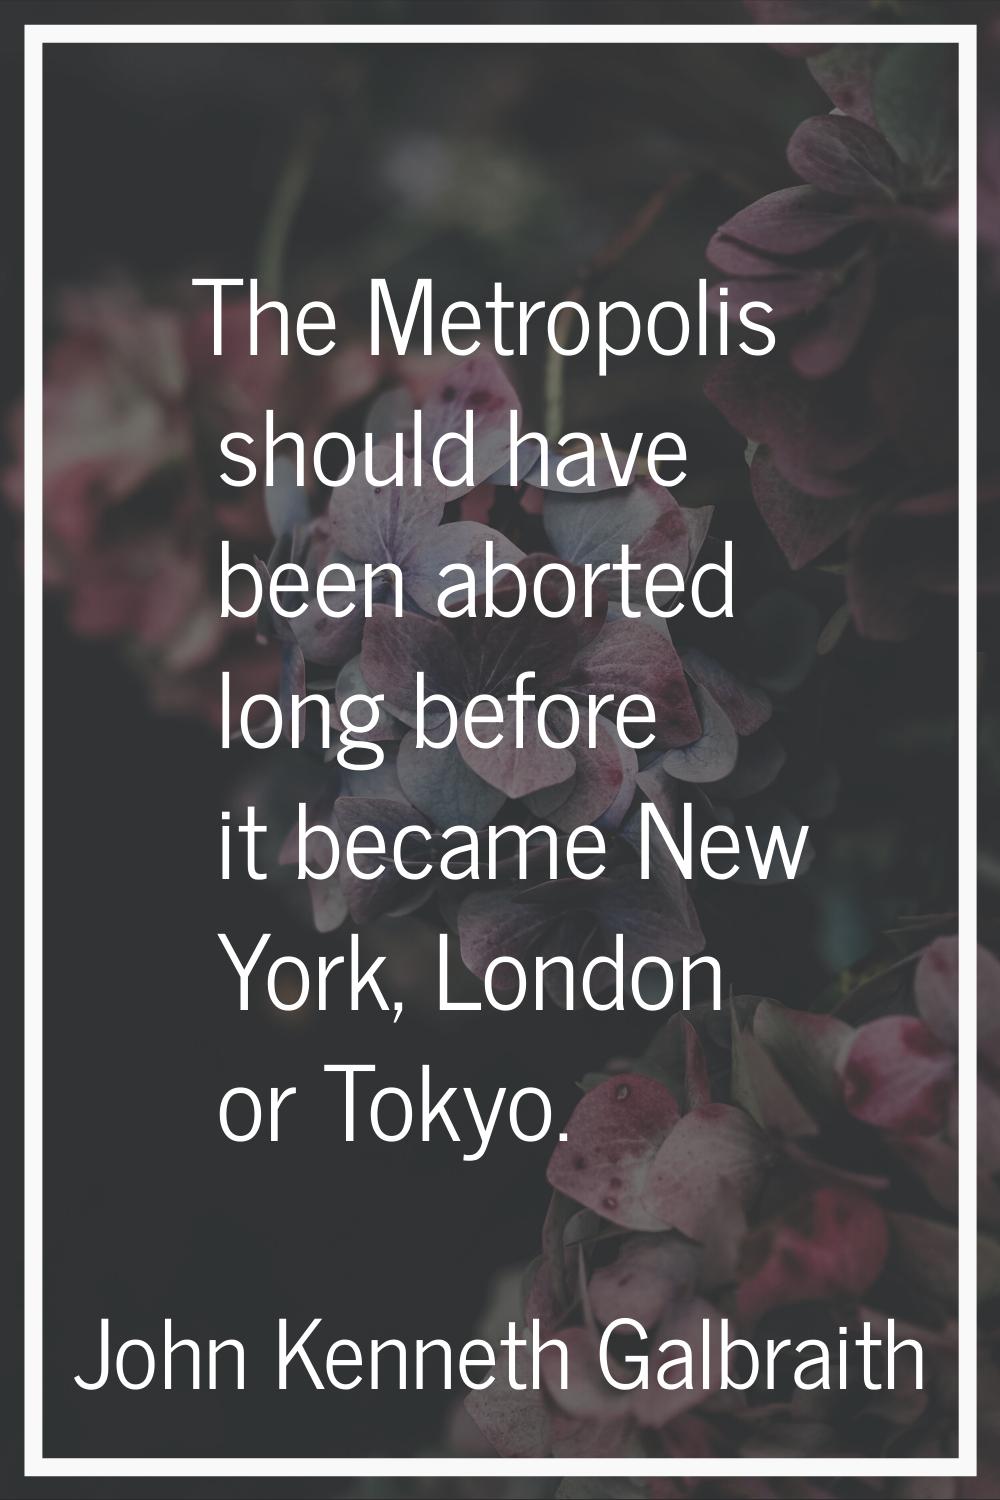 The Metropolis should have been aborted long before it became New York, London or Tokyo.